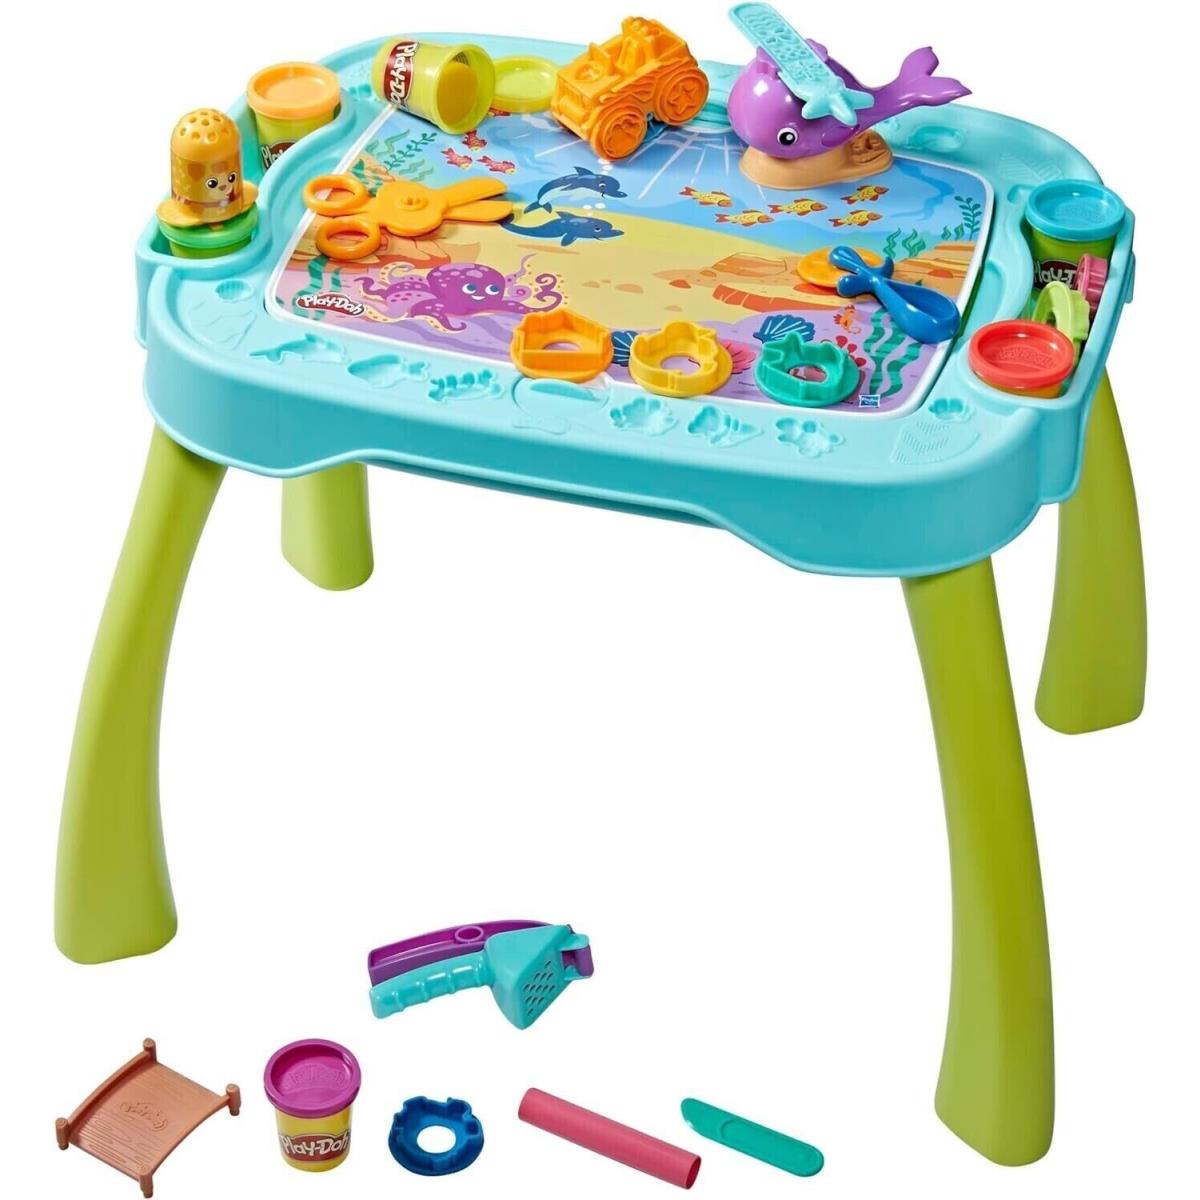 Play-doh All-in-1 Creativity Starter Activity Station Table